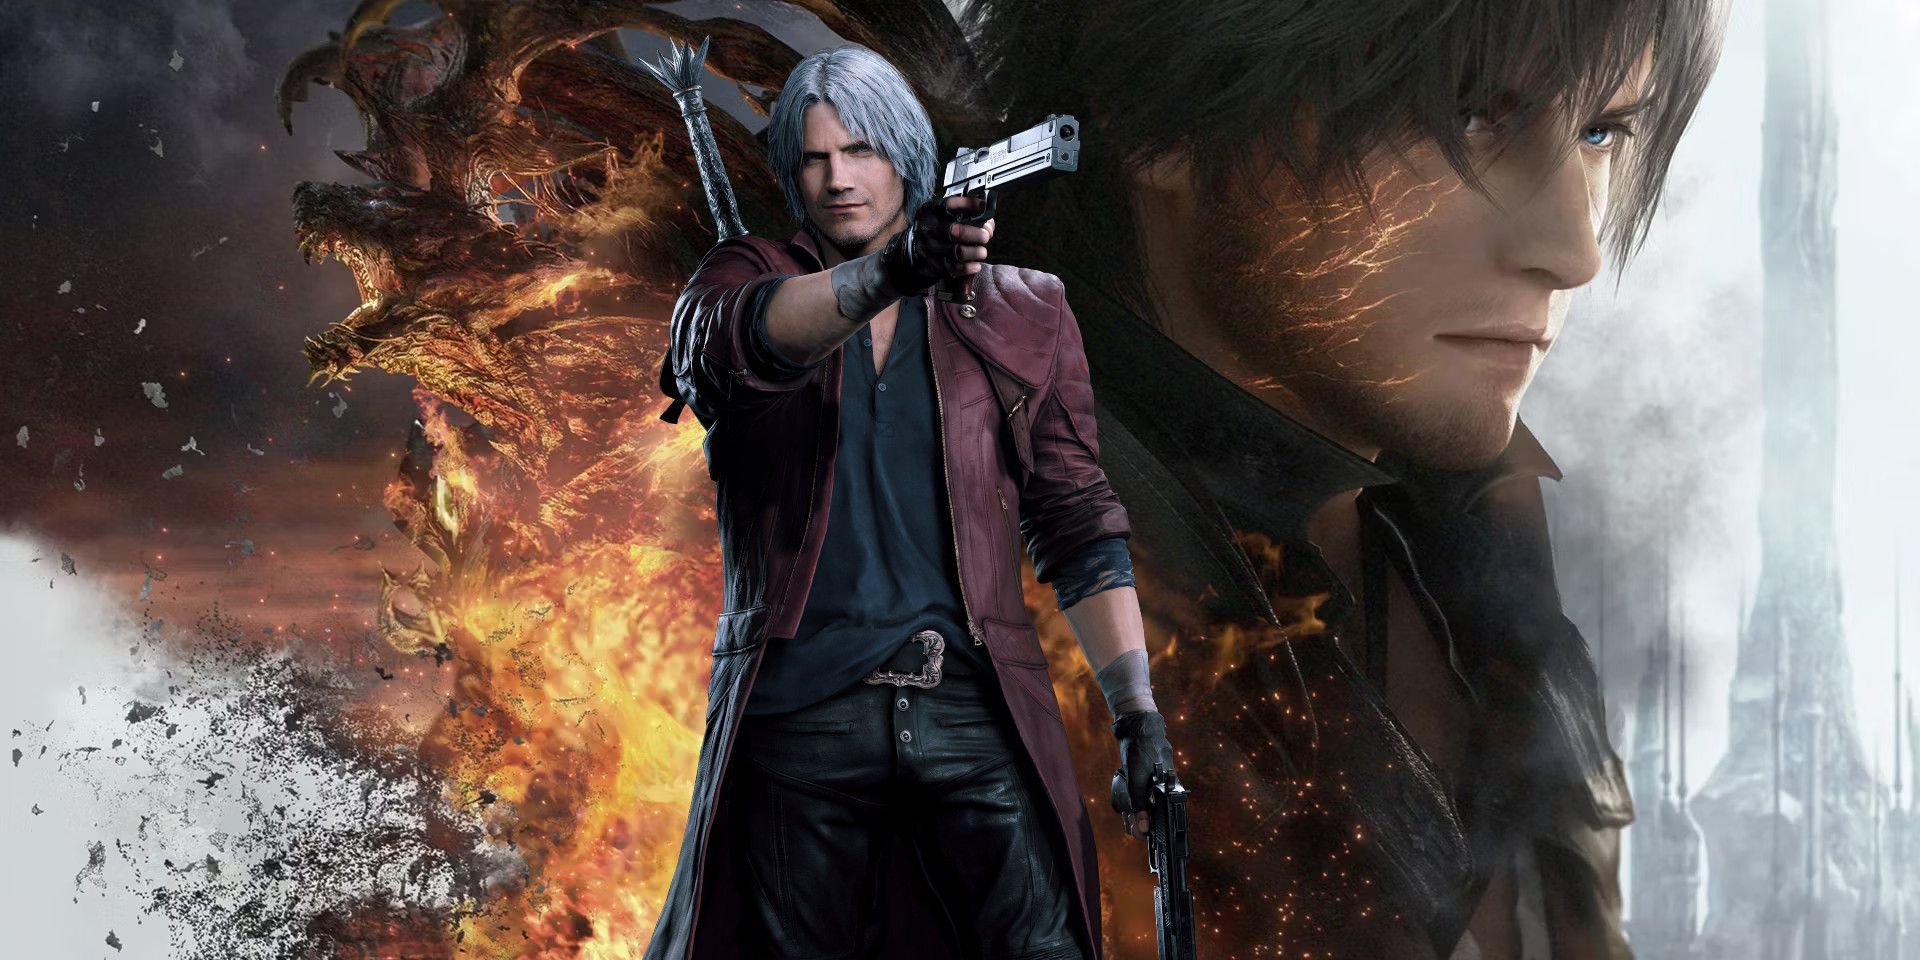 Devil May Cry 3: Special Edition - Metacritic